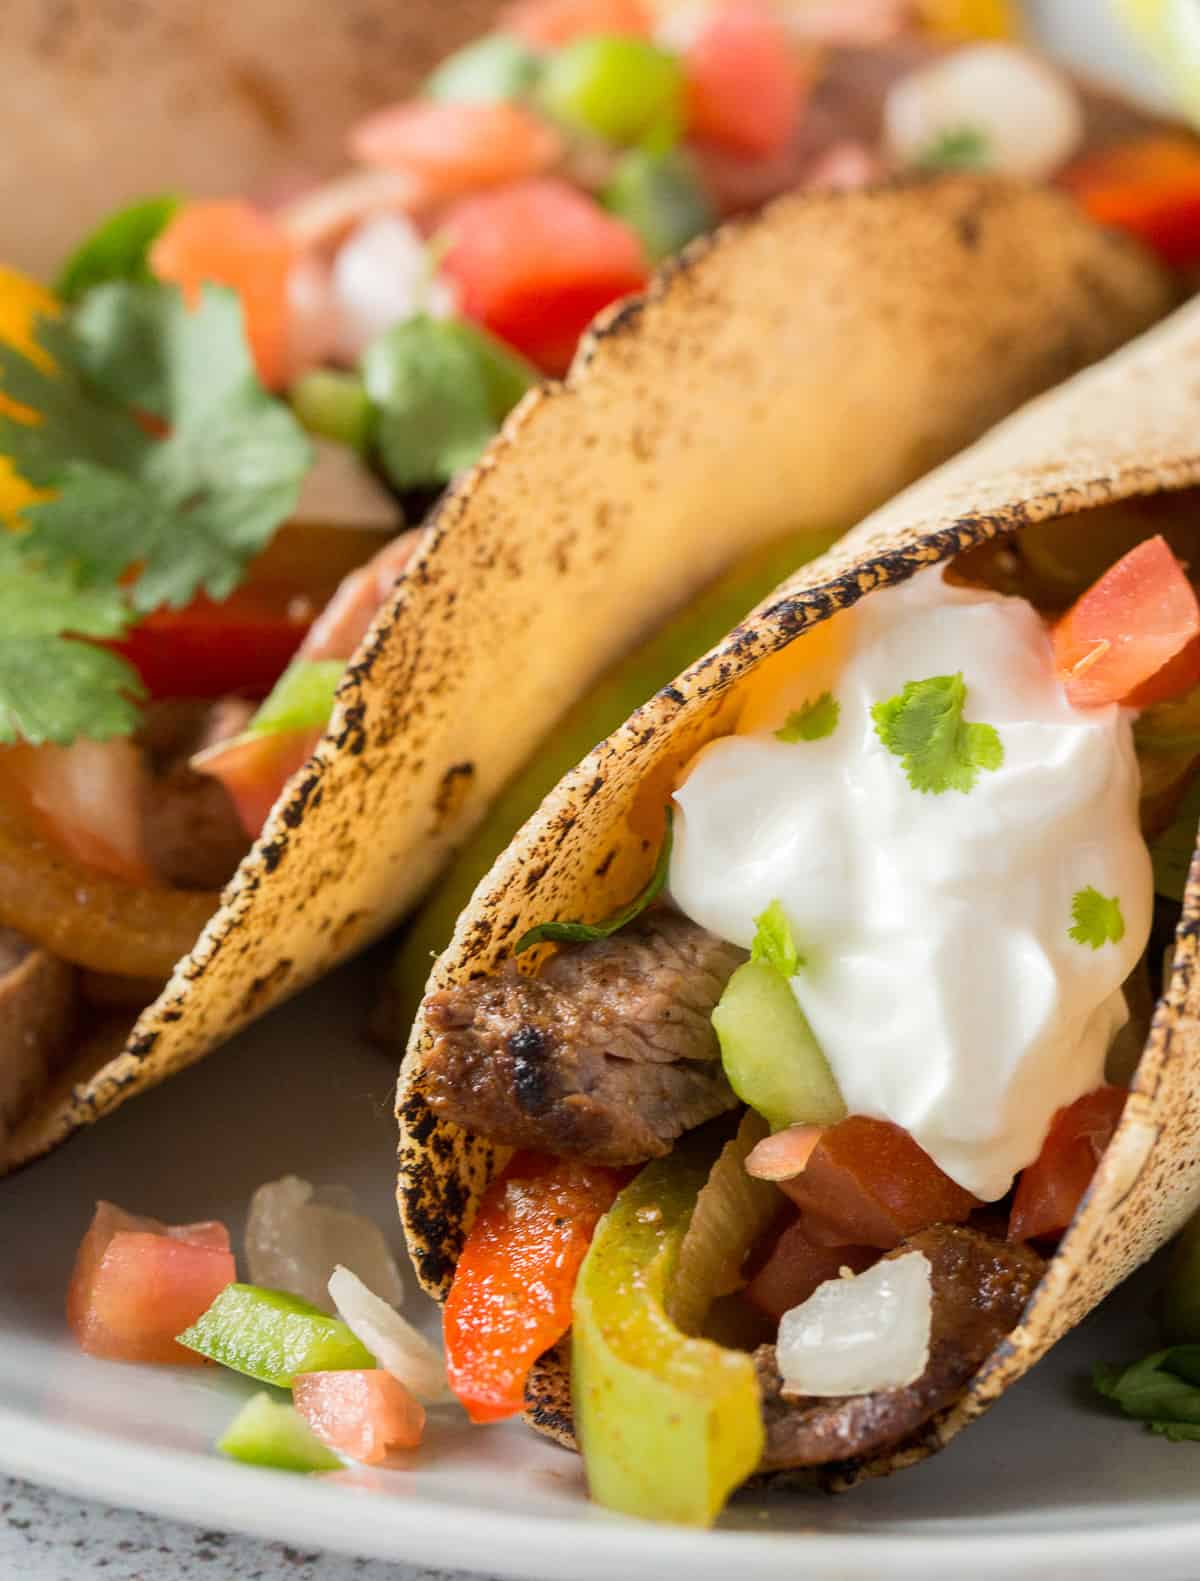 A tortilla stuffed with grilled steak, vegetables and sour cream.